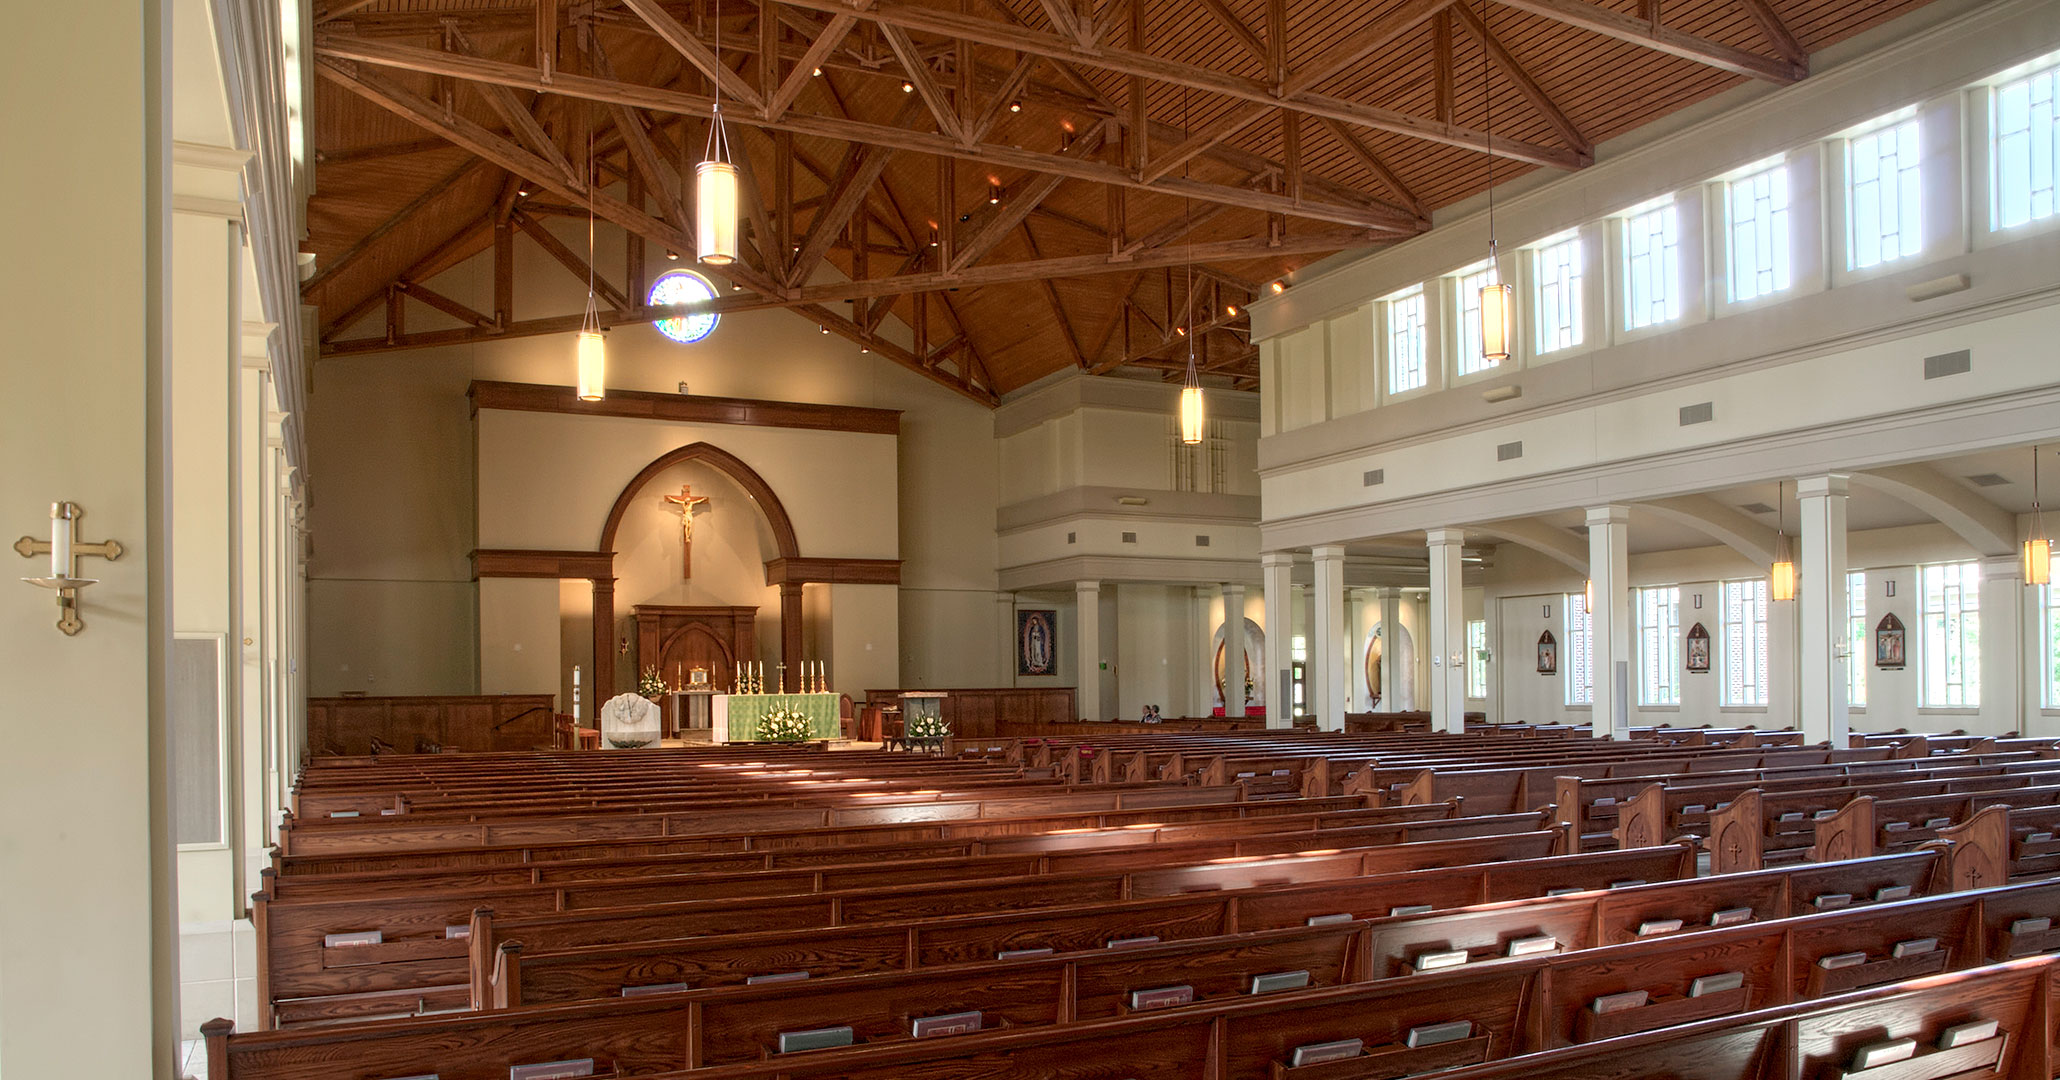 Boudreaux architects worked with St. Mark Catholic Church to design the interiors at the Catholic Church.